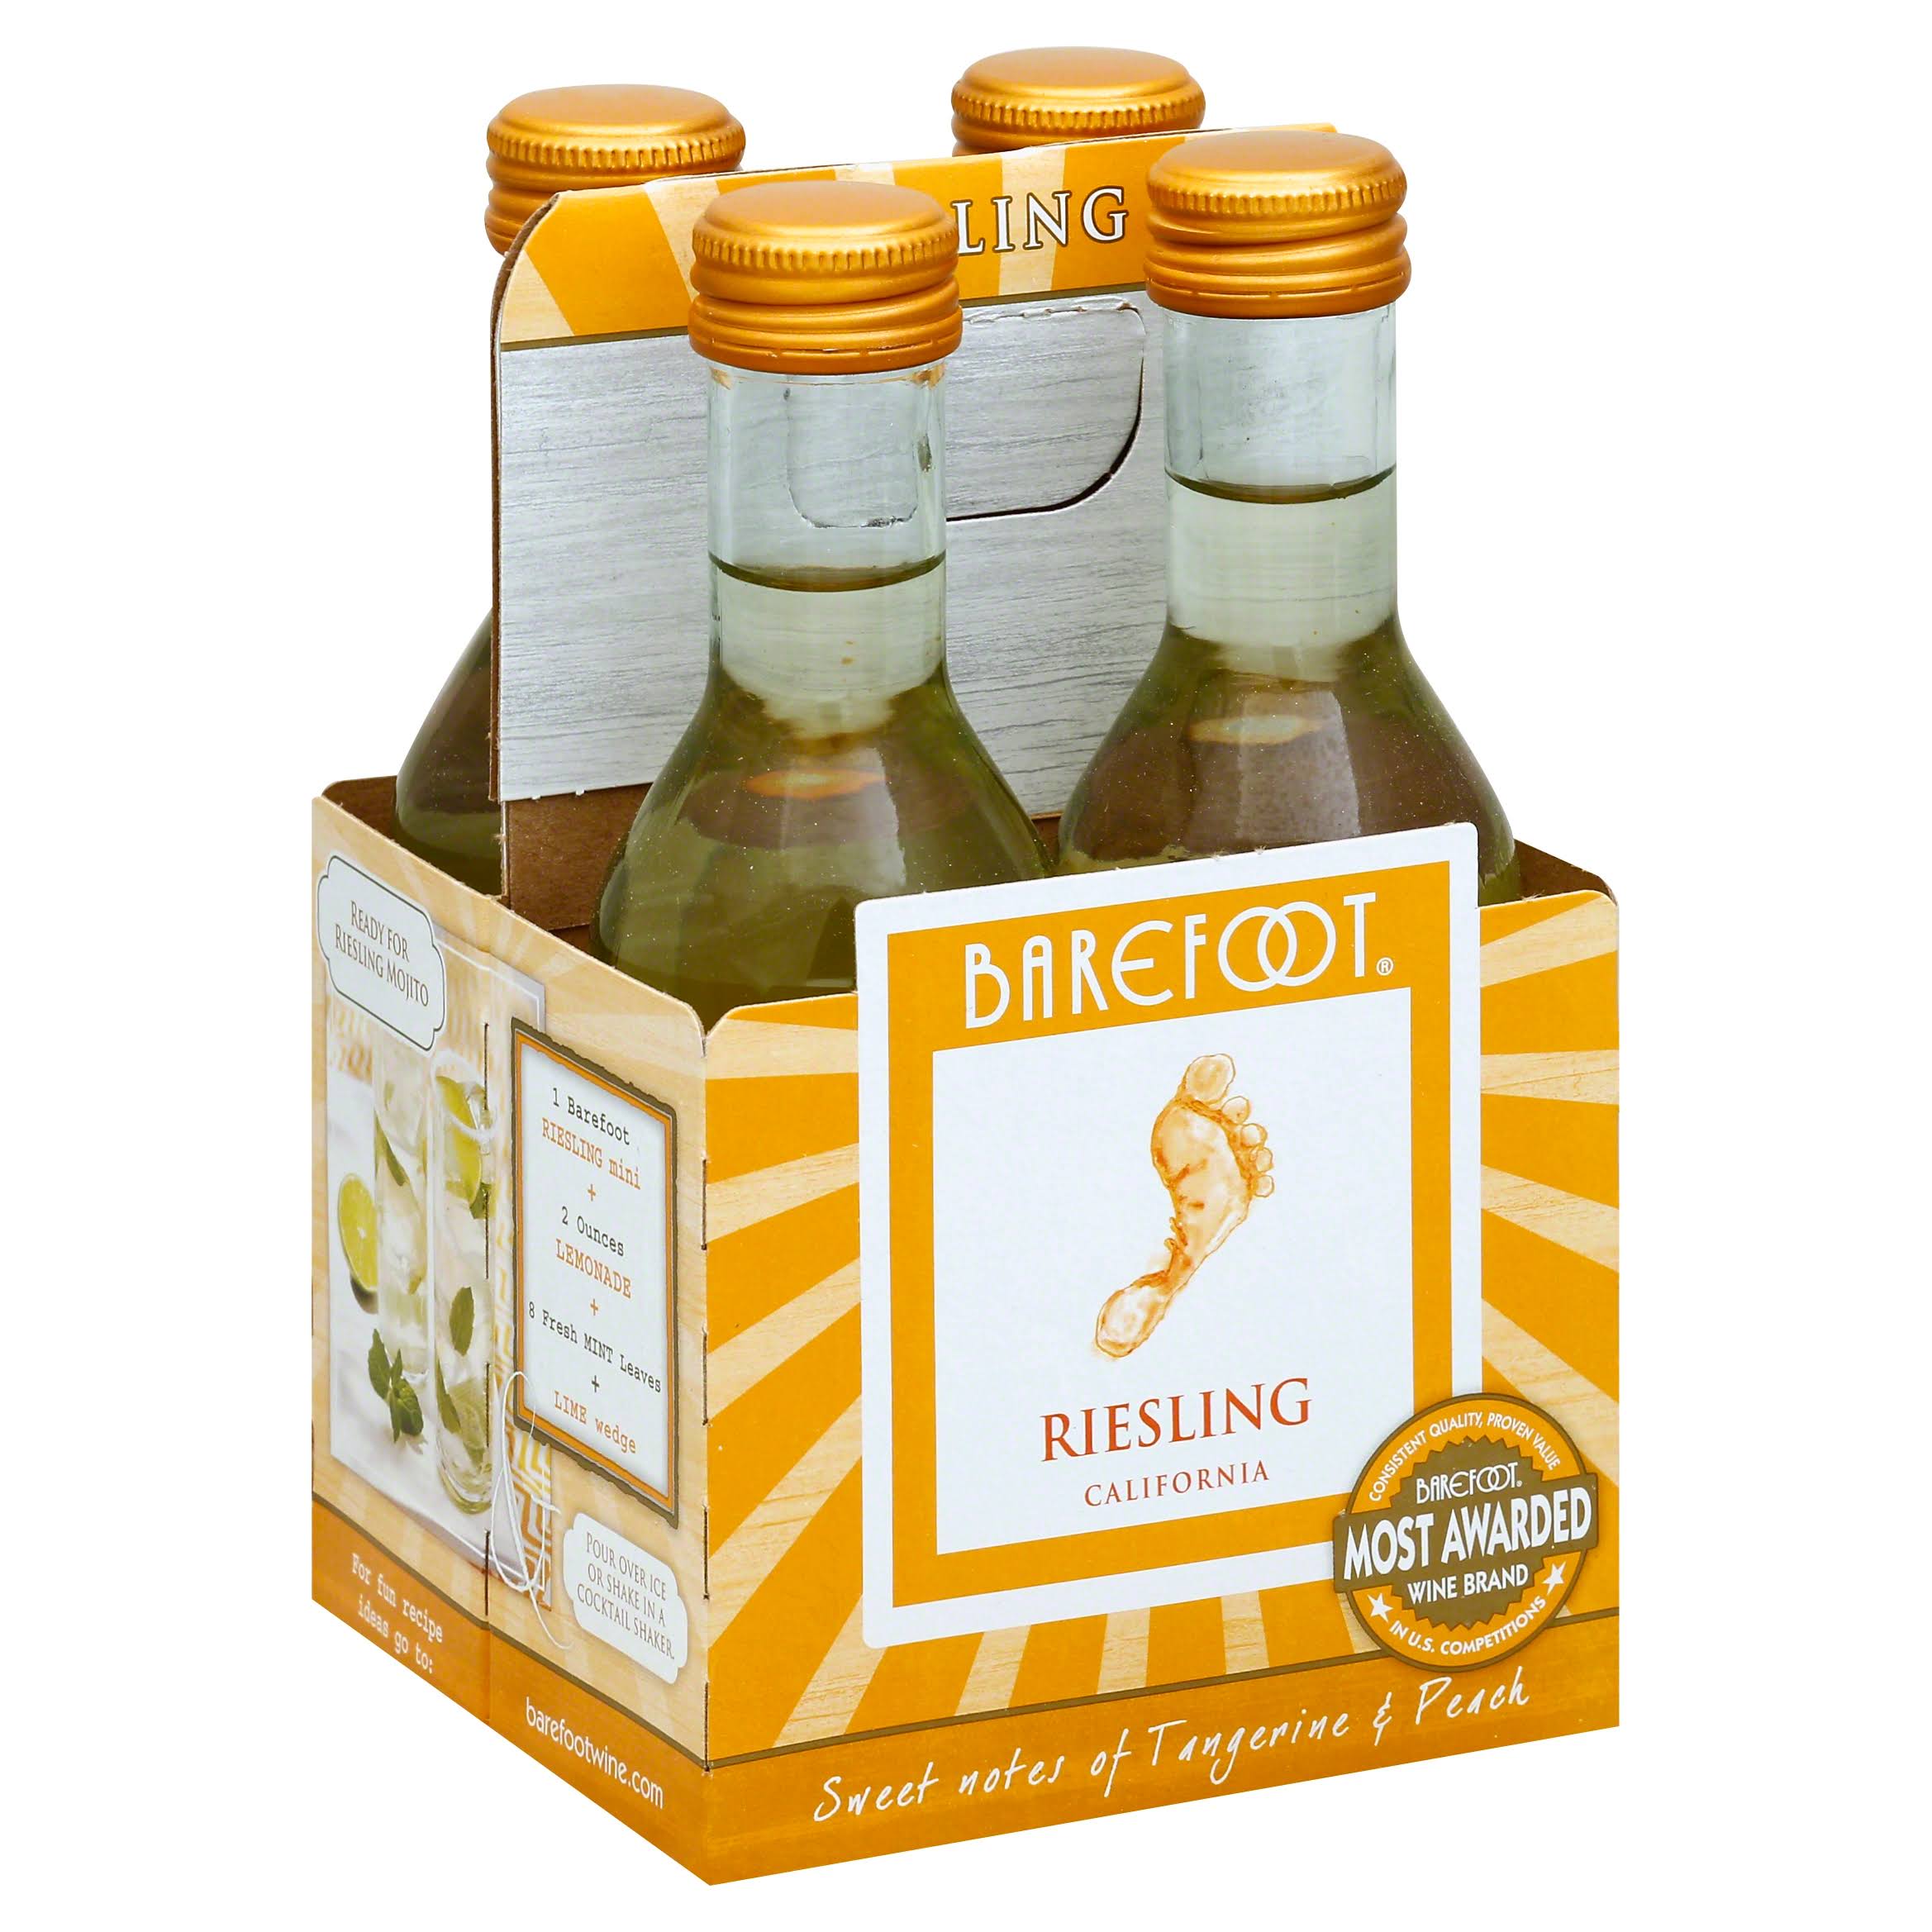 Barefoot Riesling - 187ml, 4 Pack